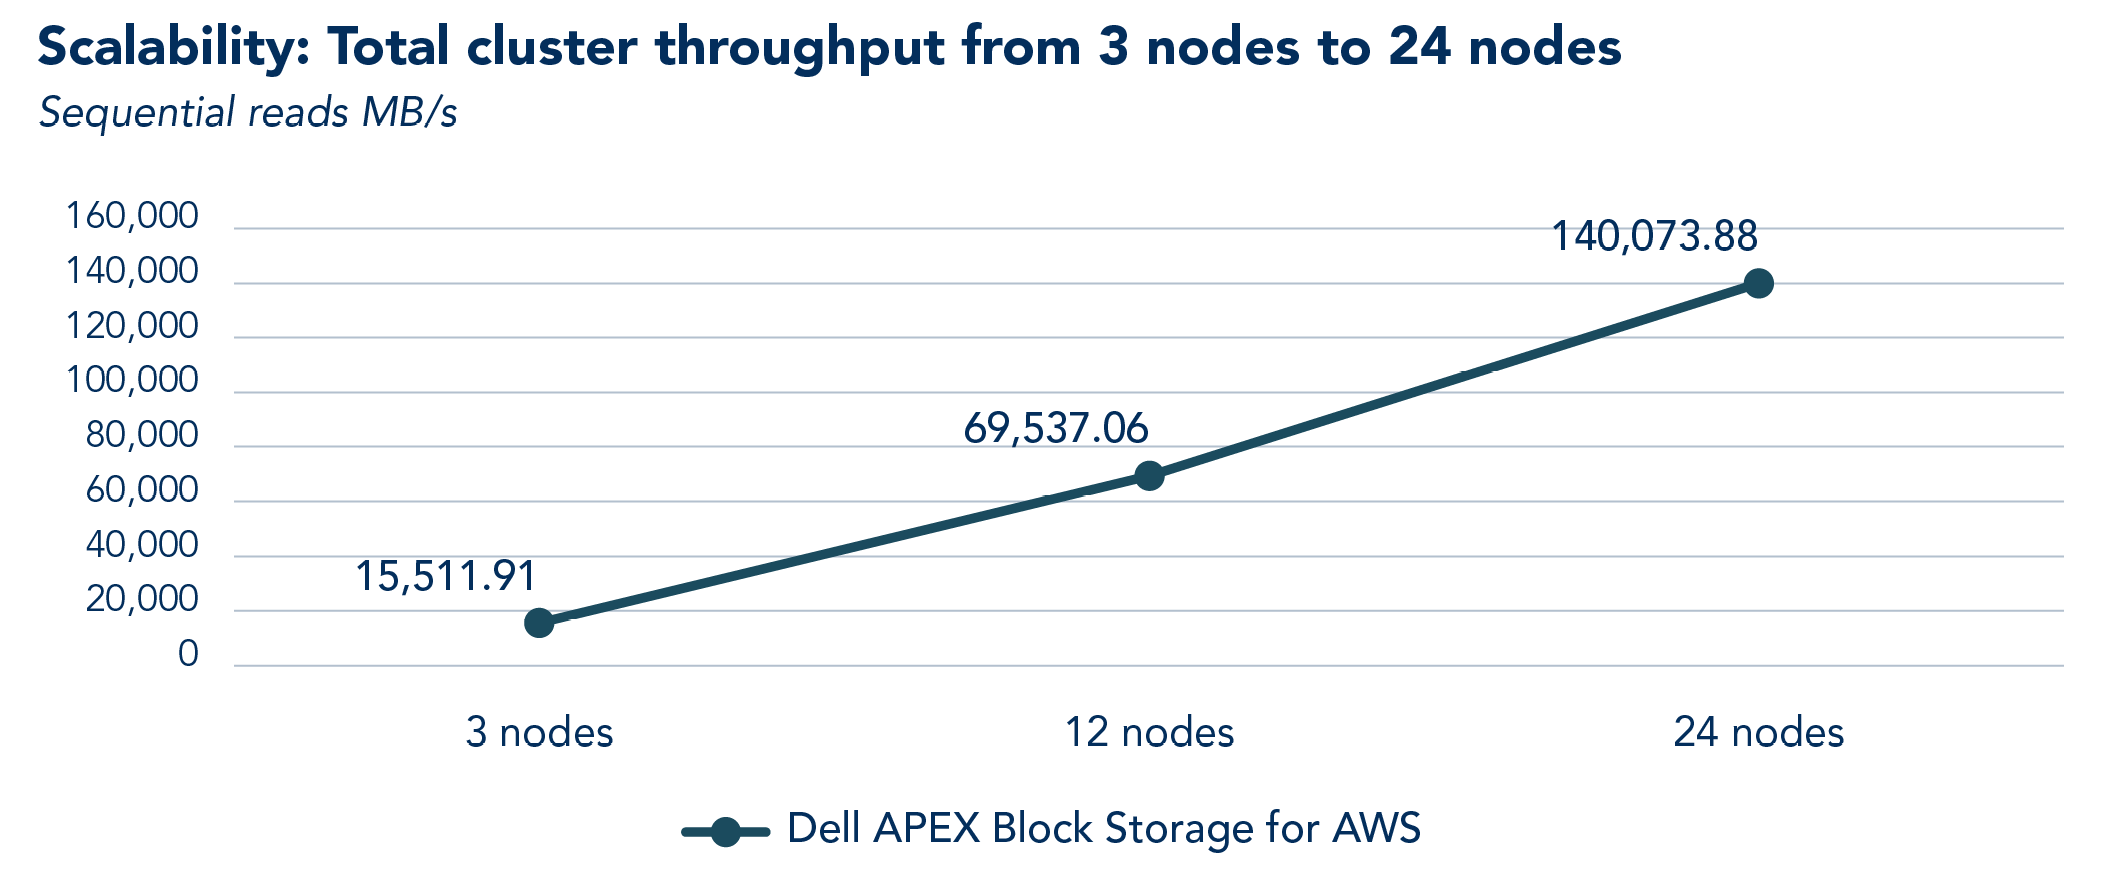 Line chart showing the sequential reads throughput scalability of the Dell APEX Block Storage for AWS cluster from 3 to 12 to 24 nodes. At 3 nodes, the cluster achieved 15,511.91 MB/s of throughput. At 12 nodes, the cluster achieved 69,537.06 MB/s. At 24 nodes, the cluster achieved 140,073.88 MB/s.